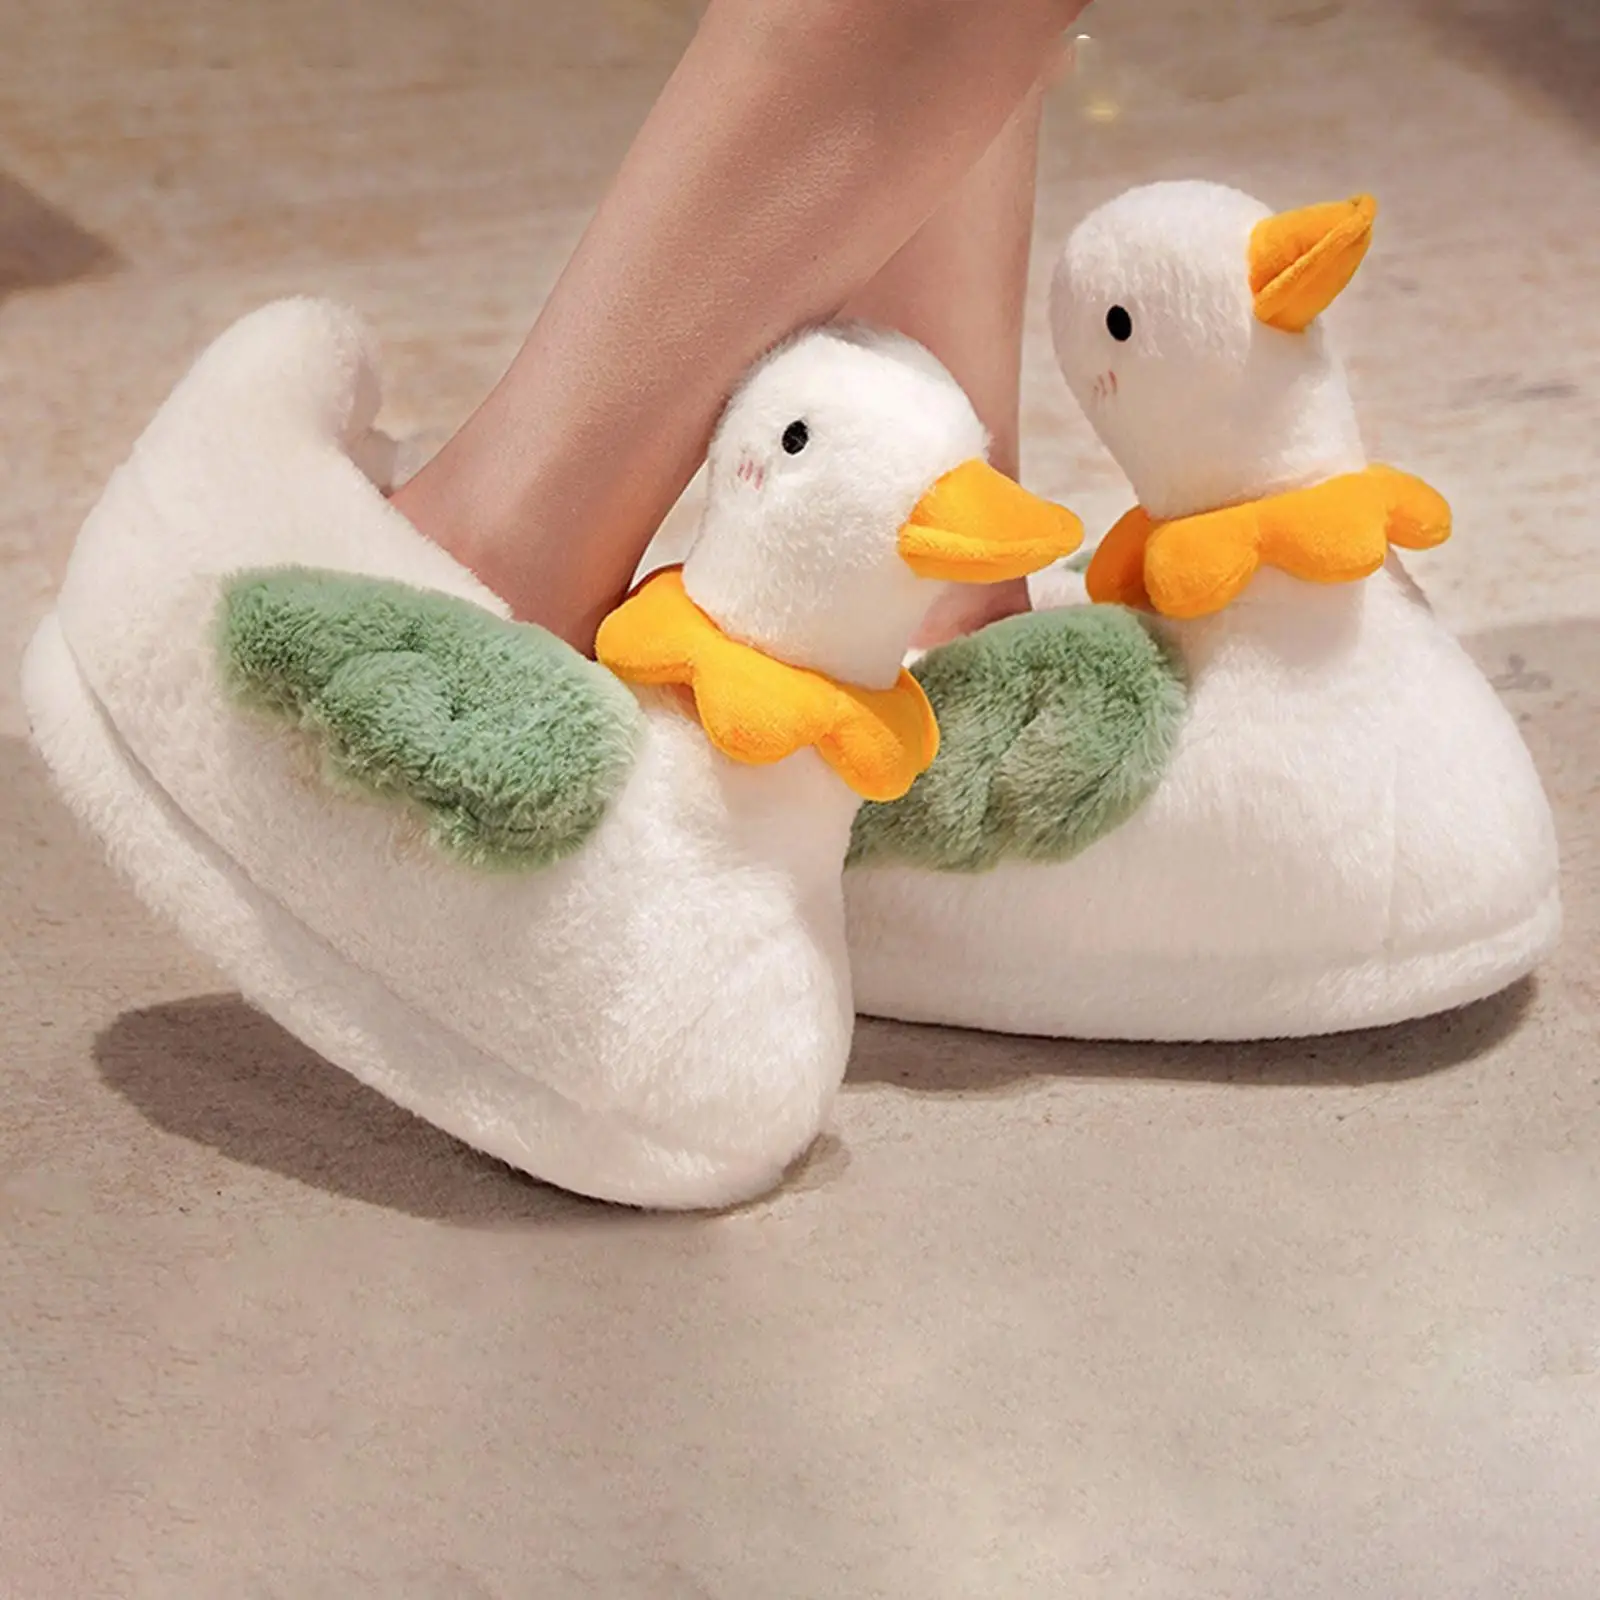 Women Duck Shaped Plush Slippers Warm Shoes House Slipper Non Slip Indoor Fuzzy Animal Slippers for Students Couple Adults